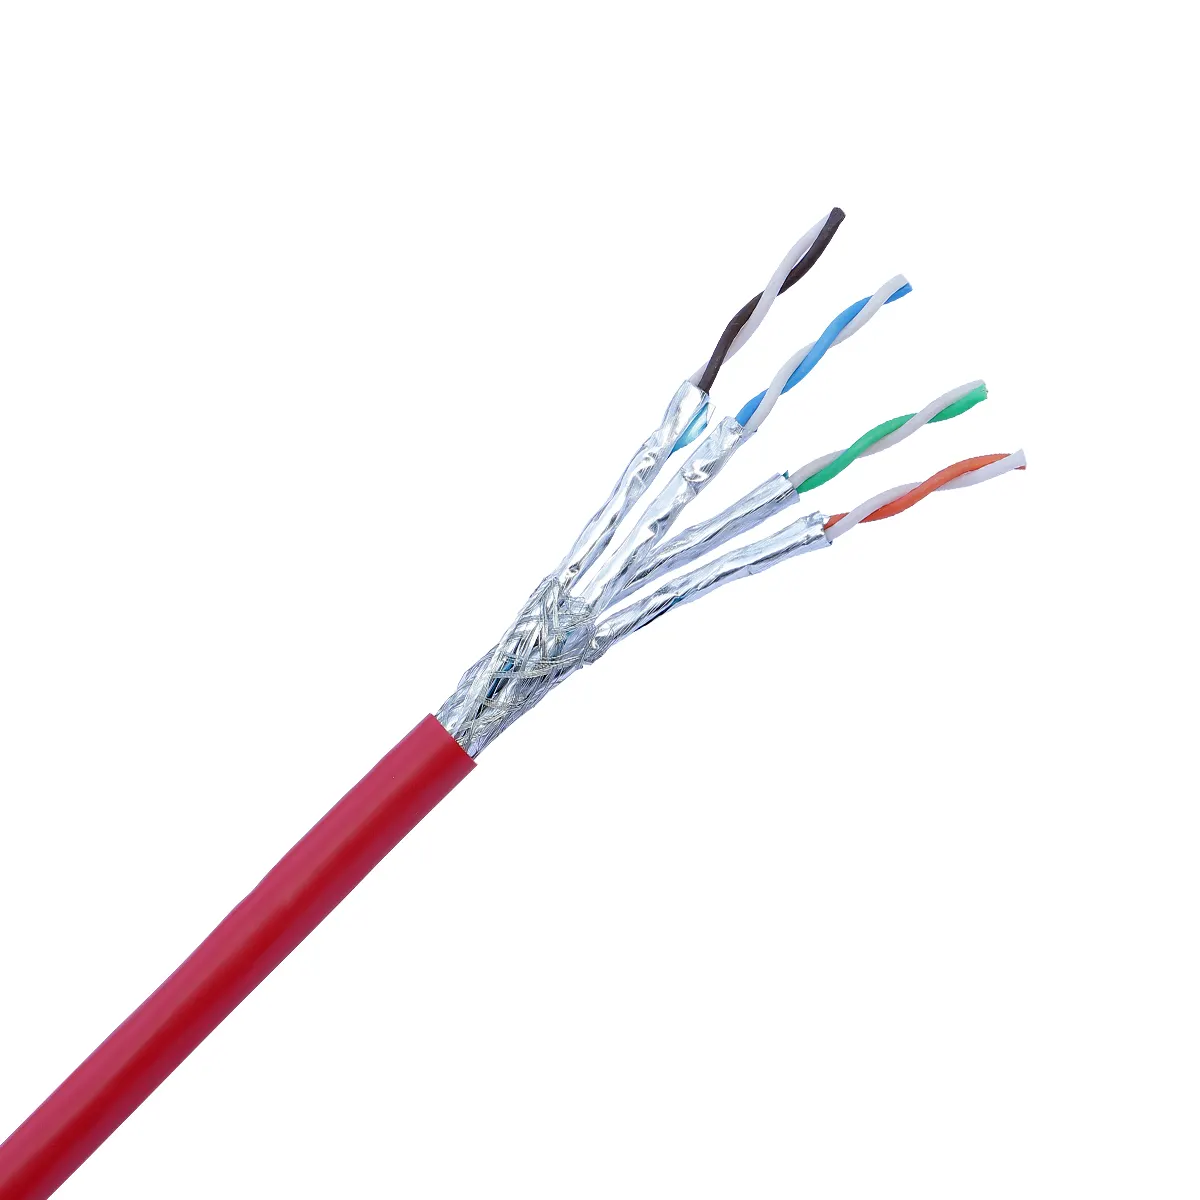 UTP Cable Cat6a 305M/Roll for Network 4 Pairs Twisted 23AWG Cat 6a Network Cable